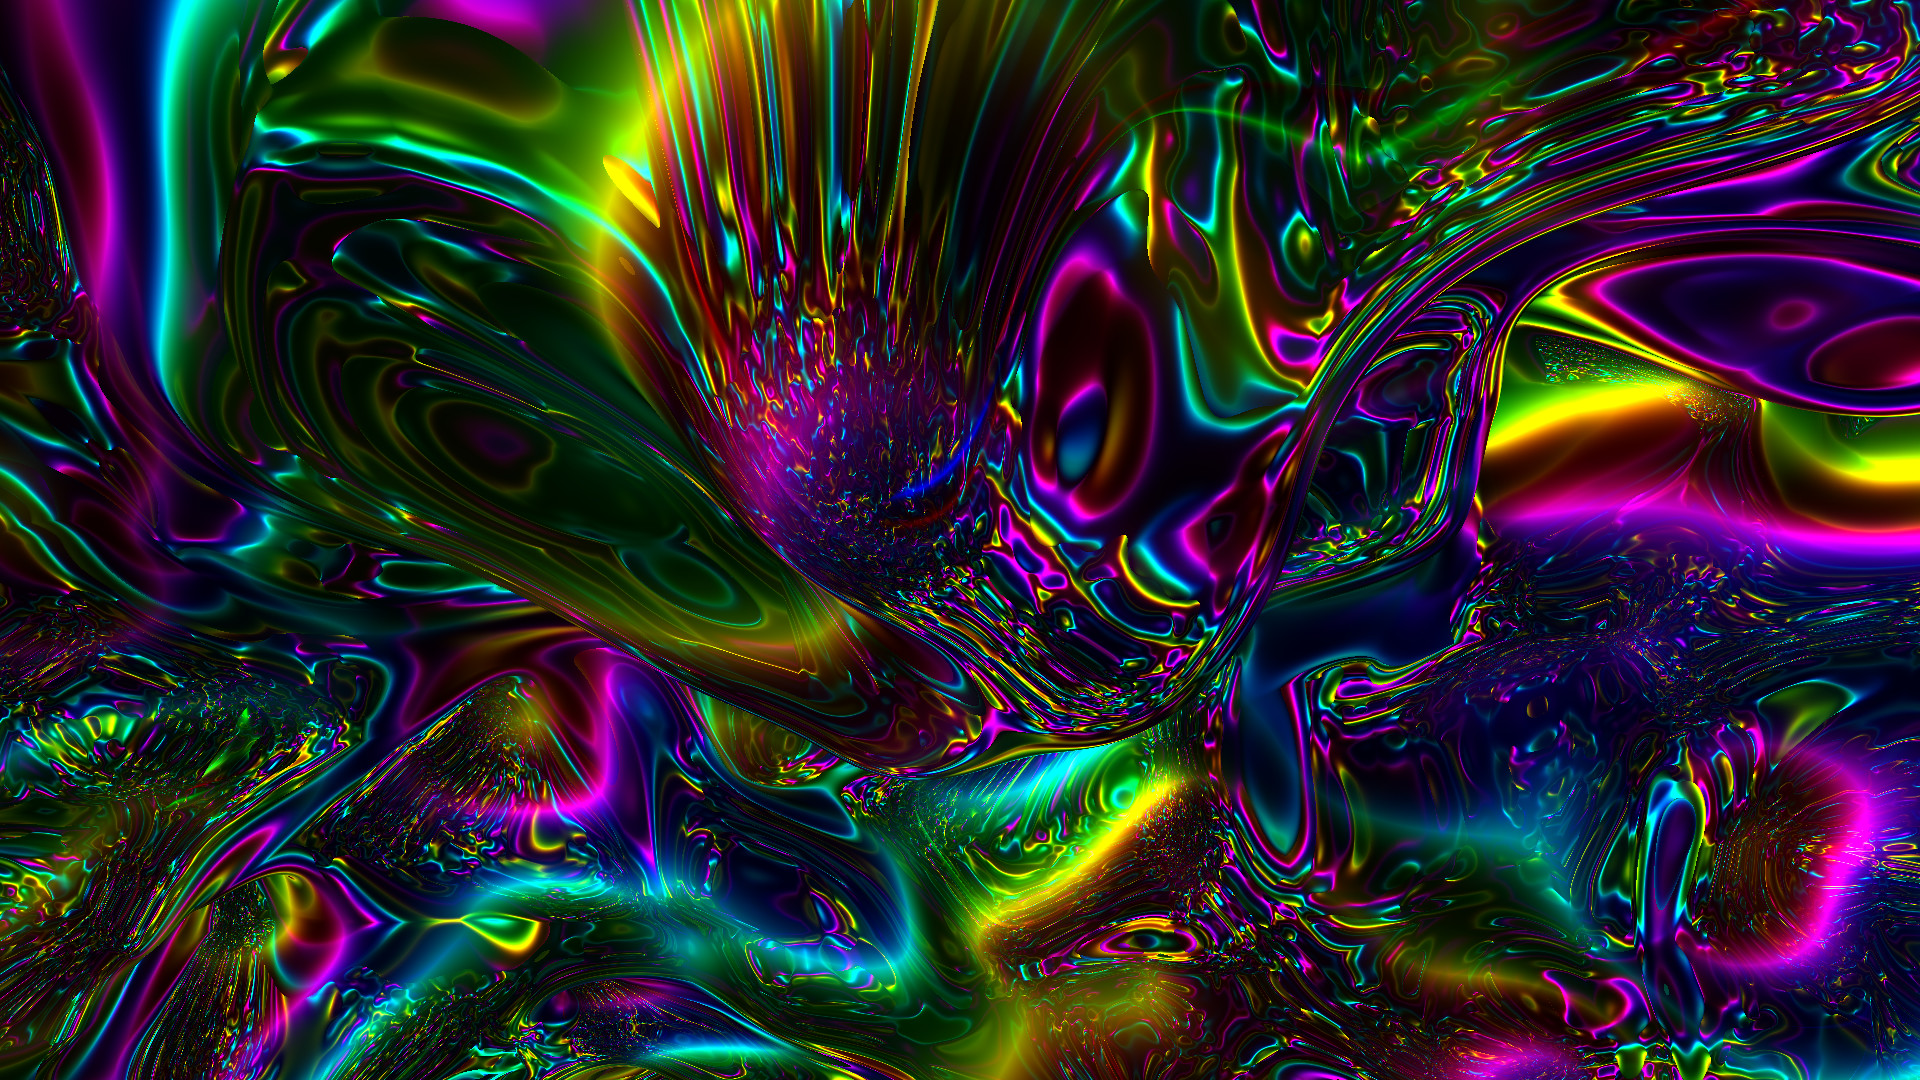 Trippy HD Wallpapers 1920x1080 (55+ images)